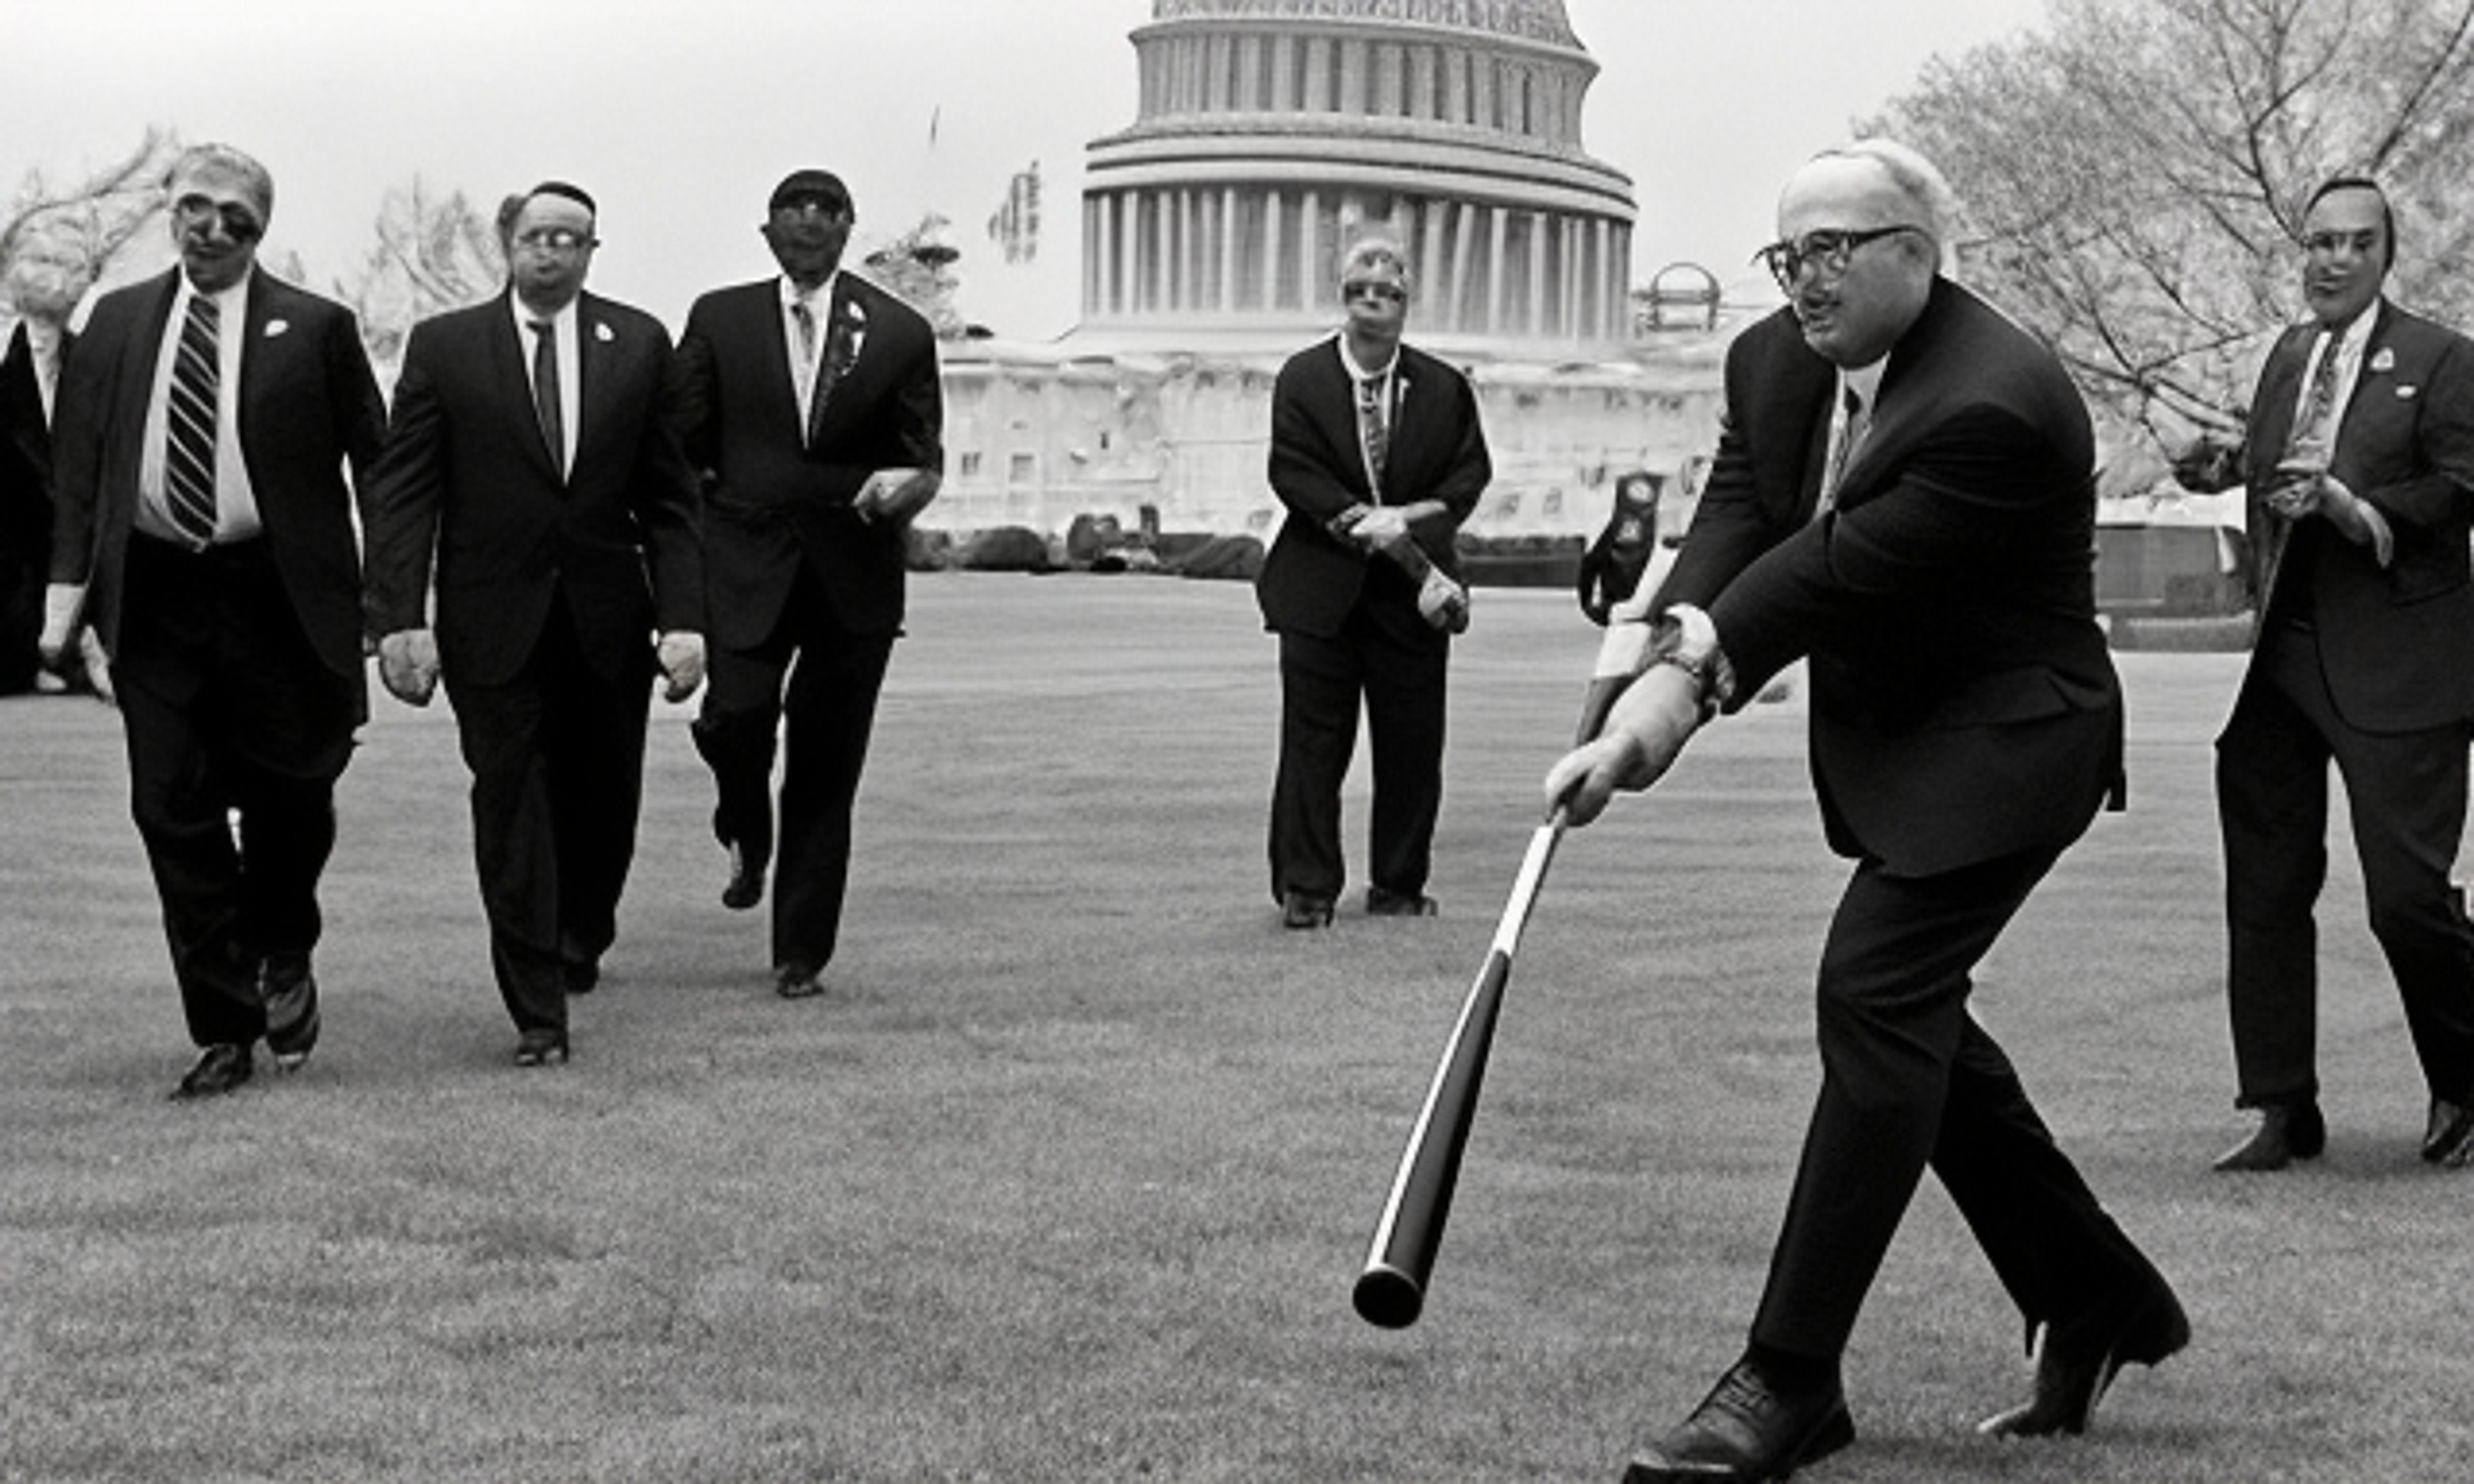 Rep. Gerry Connolly's Staffers Attacked by Baseball Bat-Wielding Assailant